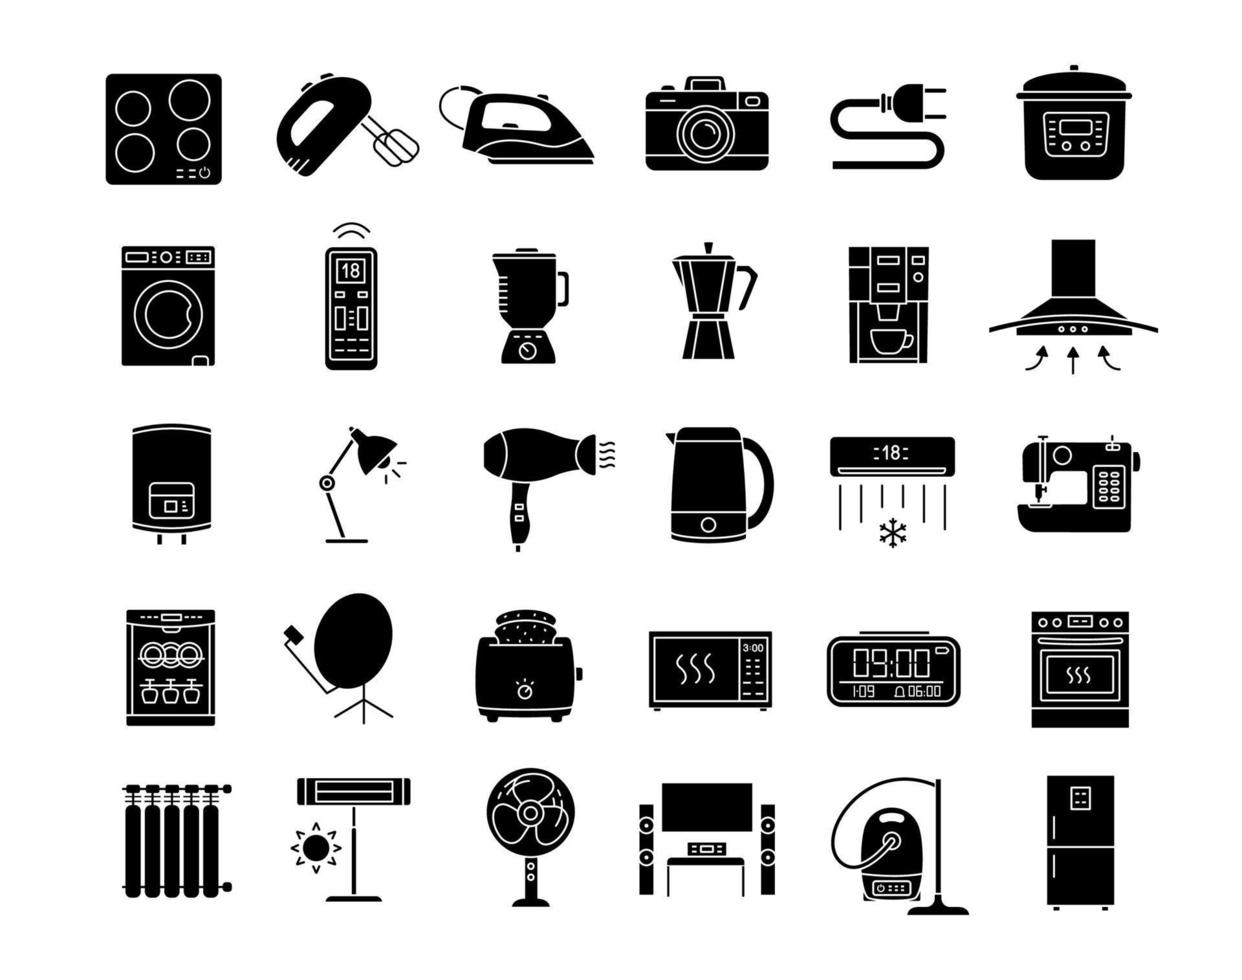 Appliance glyph icons set. Home and kitchen electronics. Domestic technology. Fridge, vacuum cleaner, washing machine, mixer, dishwasher, oven, stove. Silhouette symbols. Vector isolated illustration